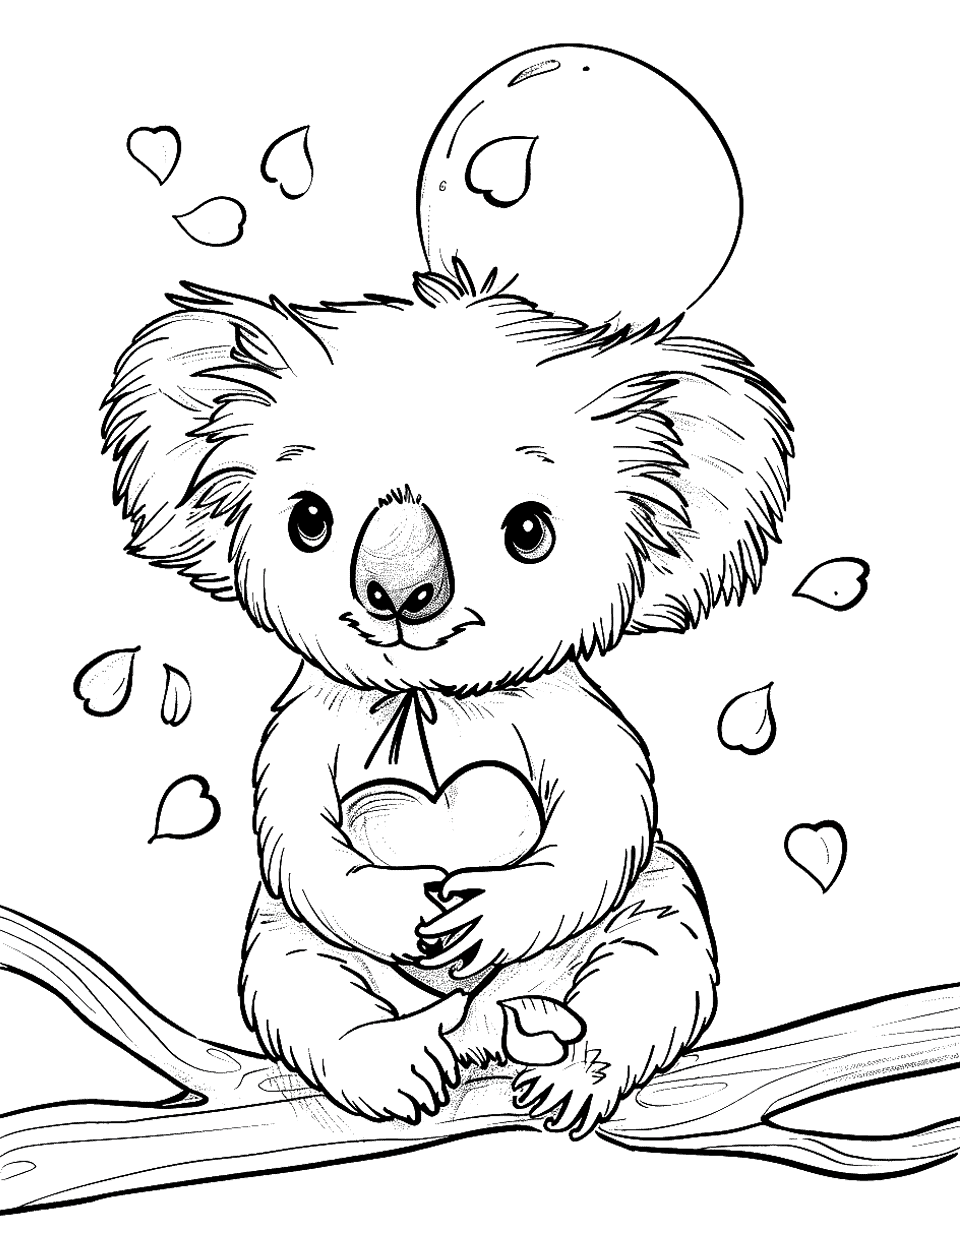 Valentine's Day Koala Coloring Page - A koala holding a heart-shaped balloon and surrounded by rose petals.